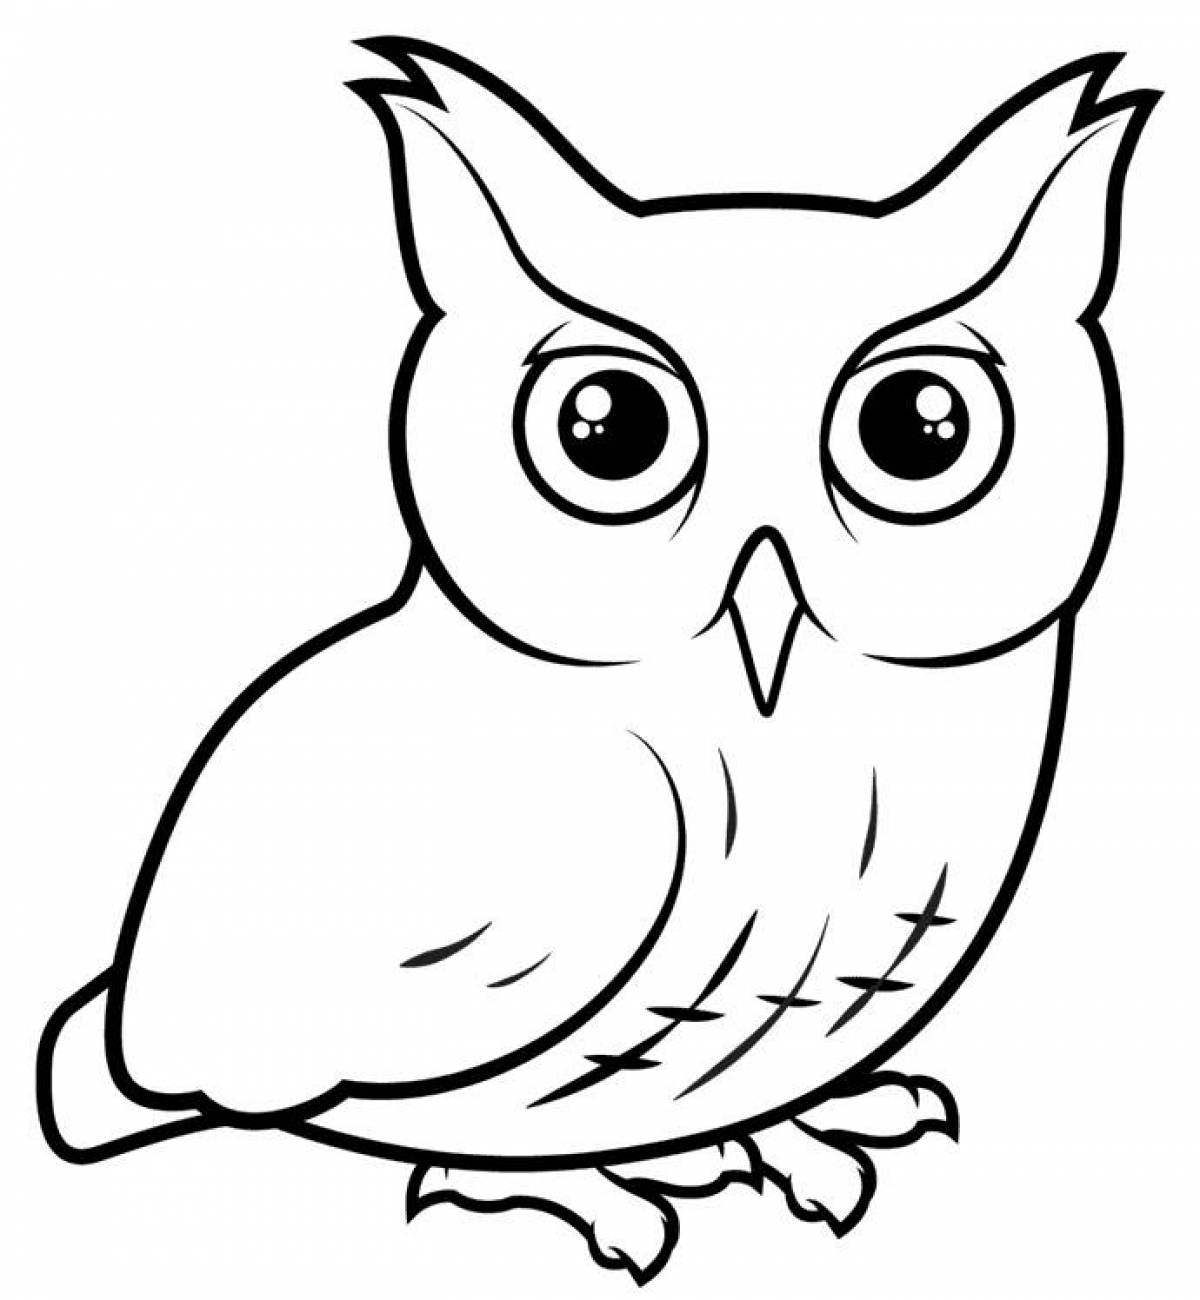 Coloring cute owl for kids